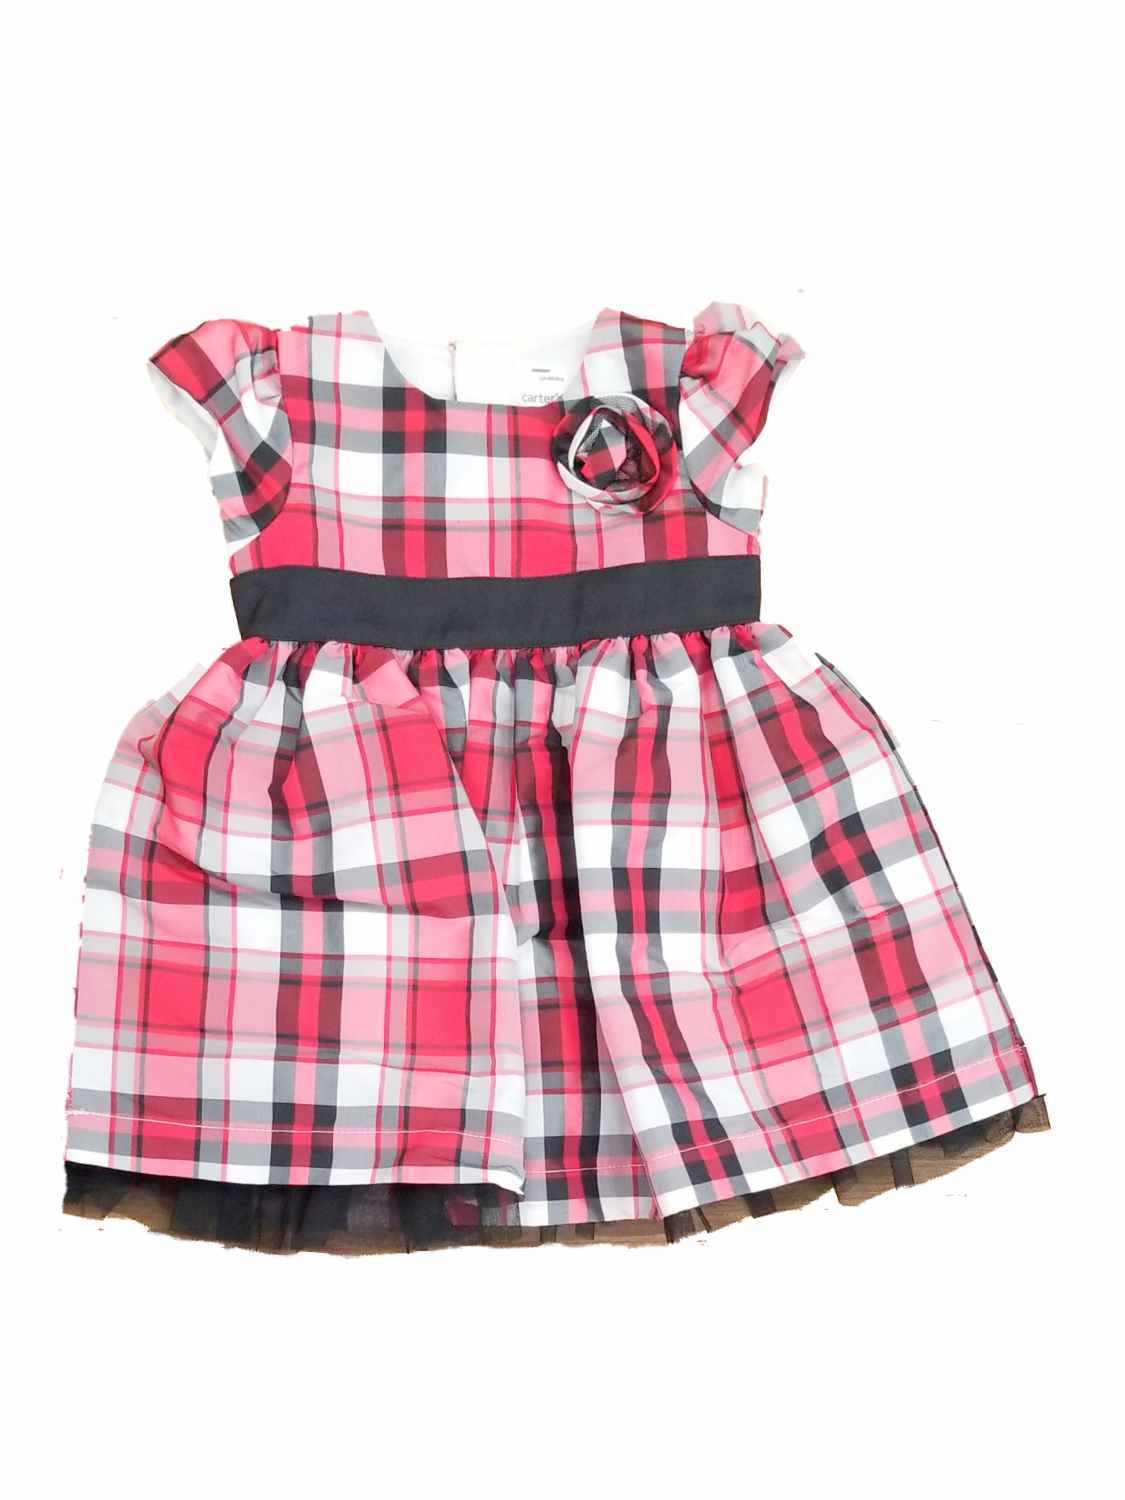 Carter's Carters Infant Girls Red Black White Plaid Christmas Holiday Party Dress 6M